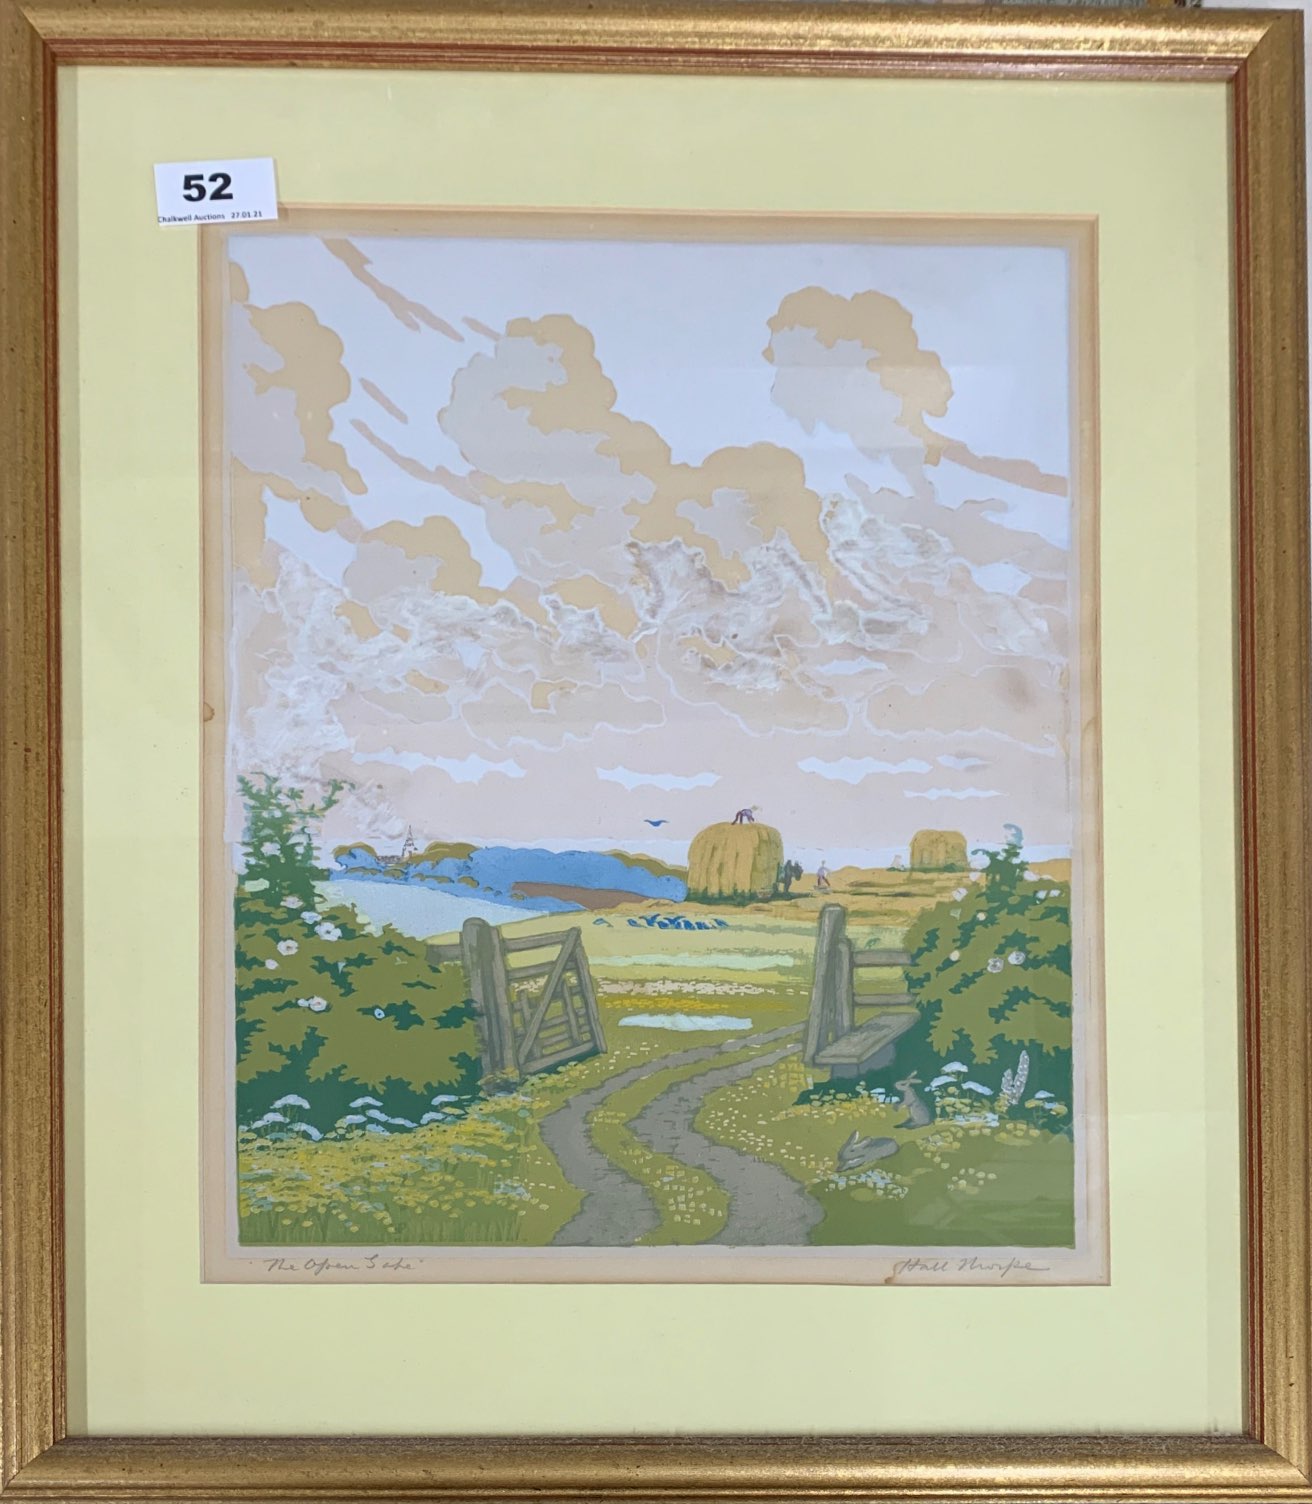 A Hall Thorpe '1874-1947' pencil signed framed wood cut entitled 'The open gate', 43cm x 51cm.